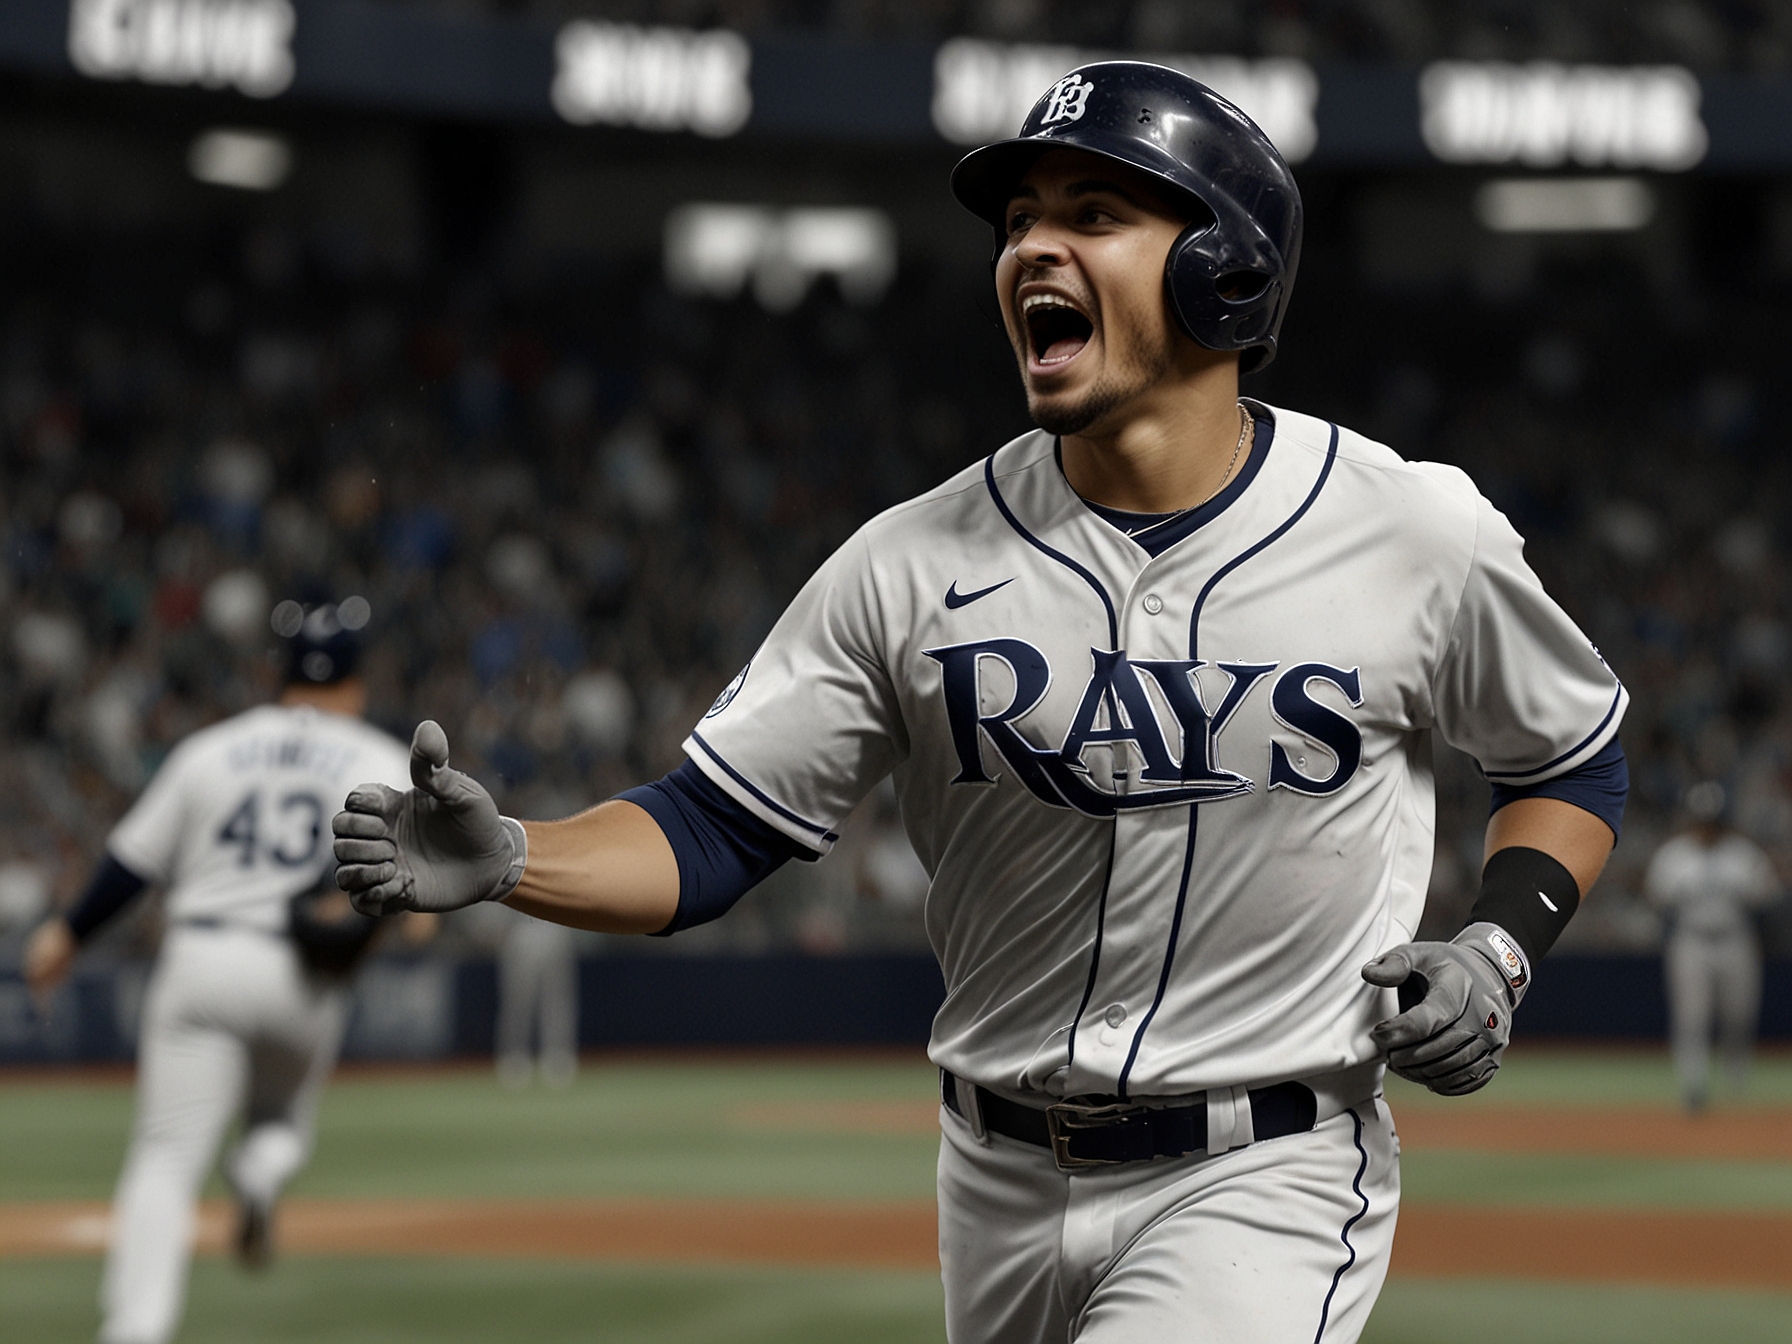 Jose Siri celebrates rounding the bases after hitting a two-run homer in the ninth inning against the Atlanta Braves, securing an 8-6 win for the Tampa Bay Rays.